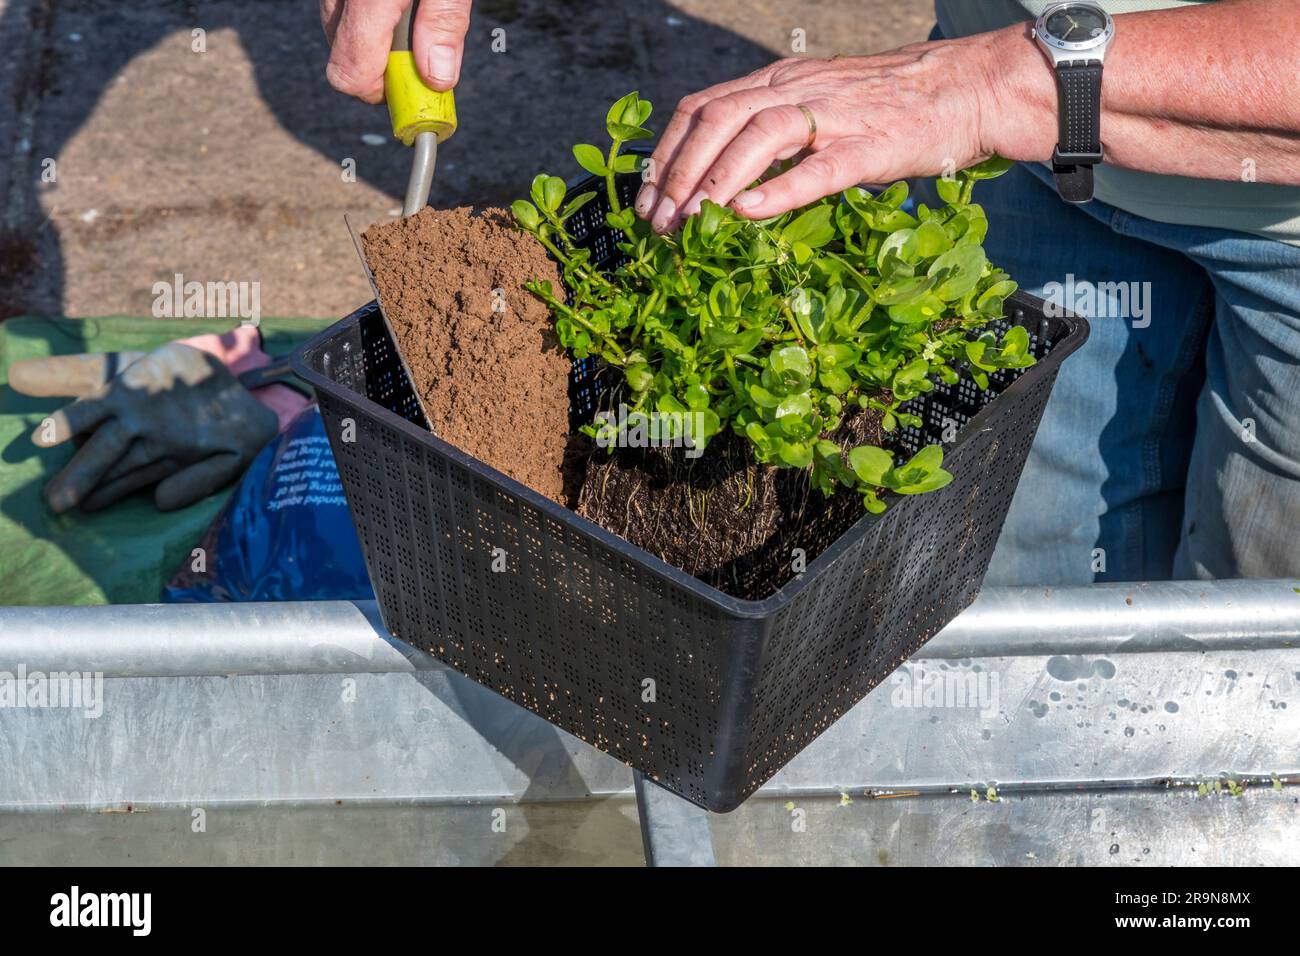 Woman repotting a water hyssop plant, Bacopa caroliniana, aquatic plant in a garden water feature that she is constructing from a metal water trough. Stock Photo